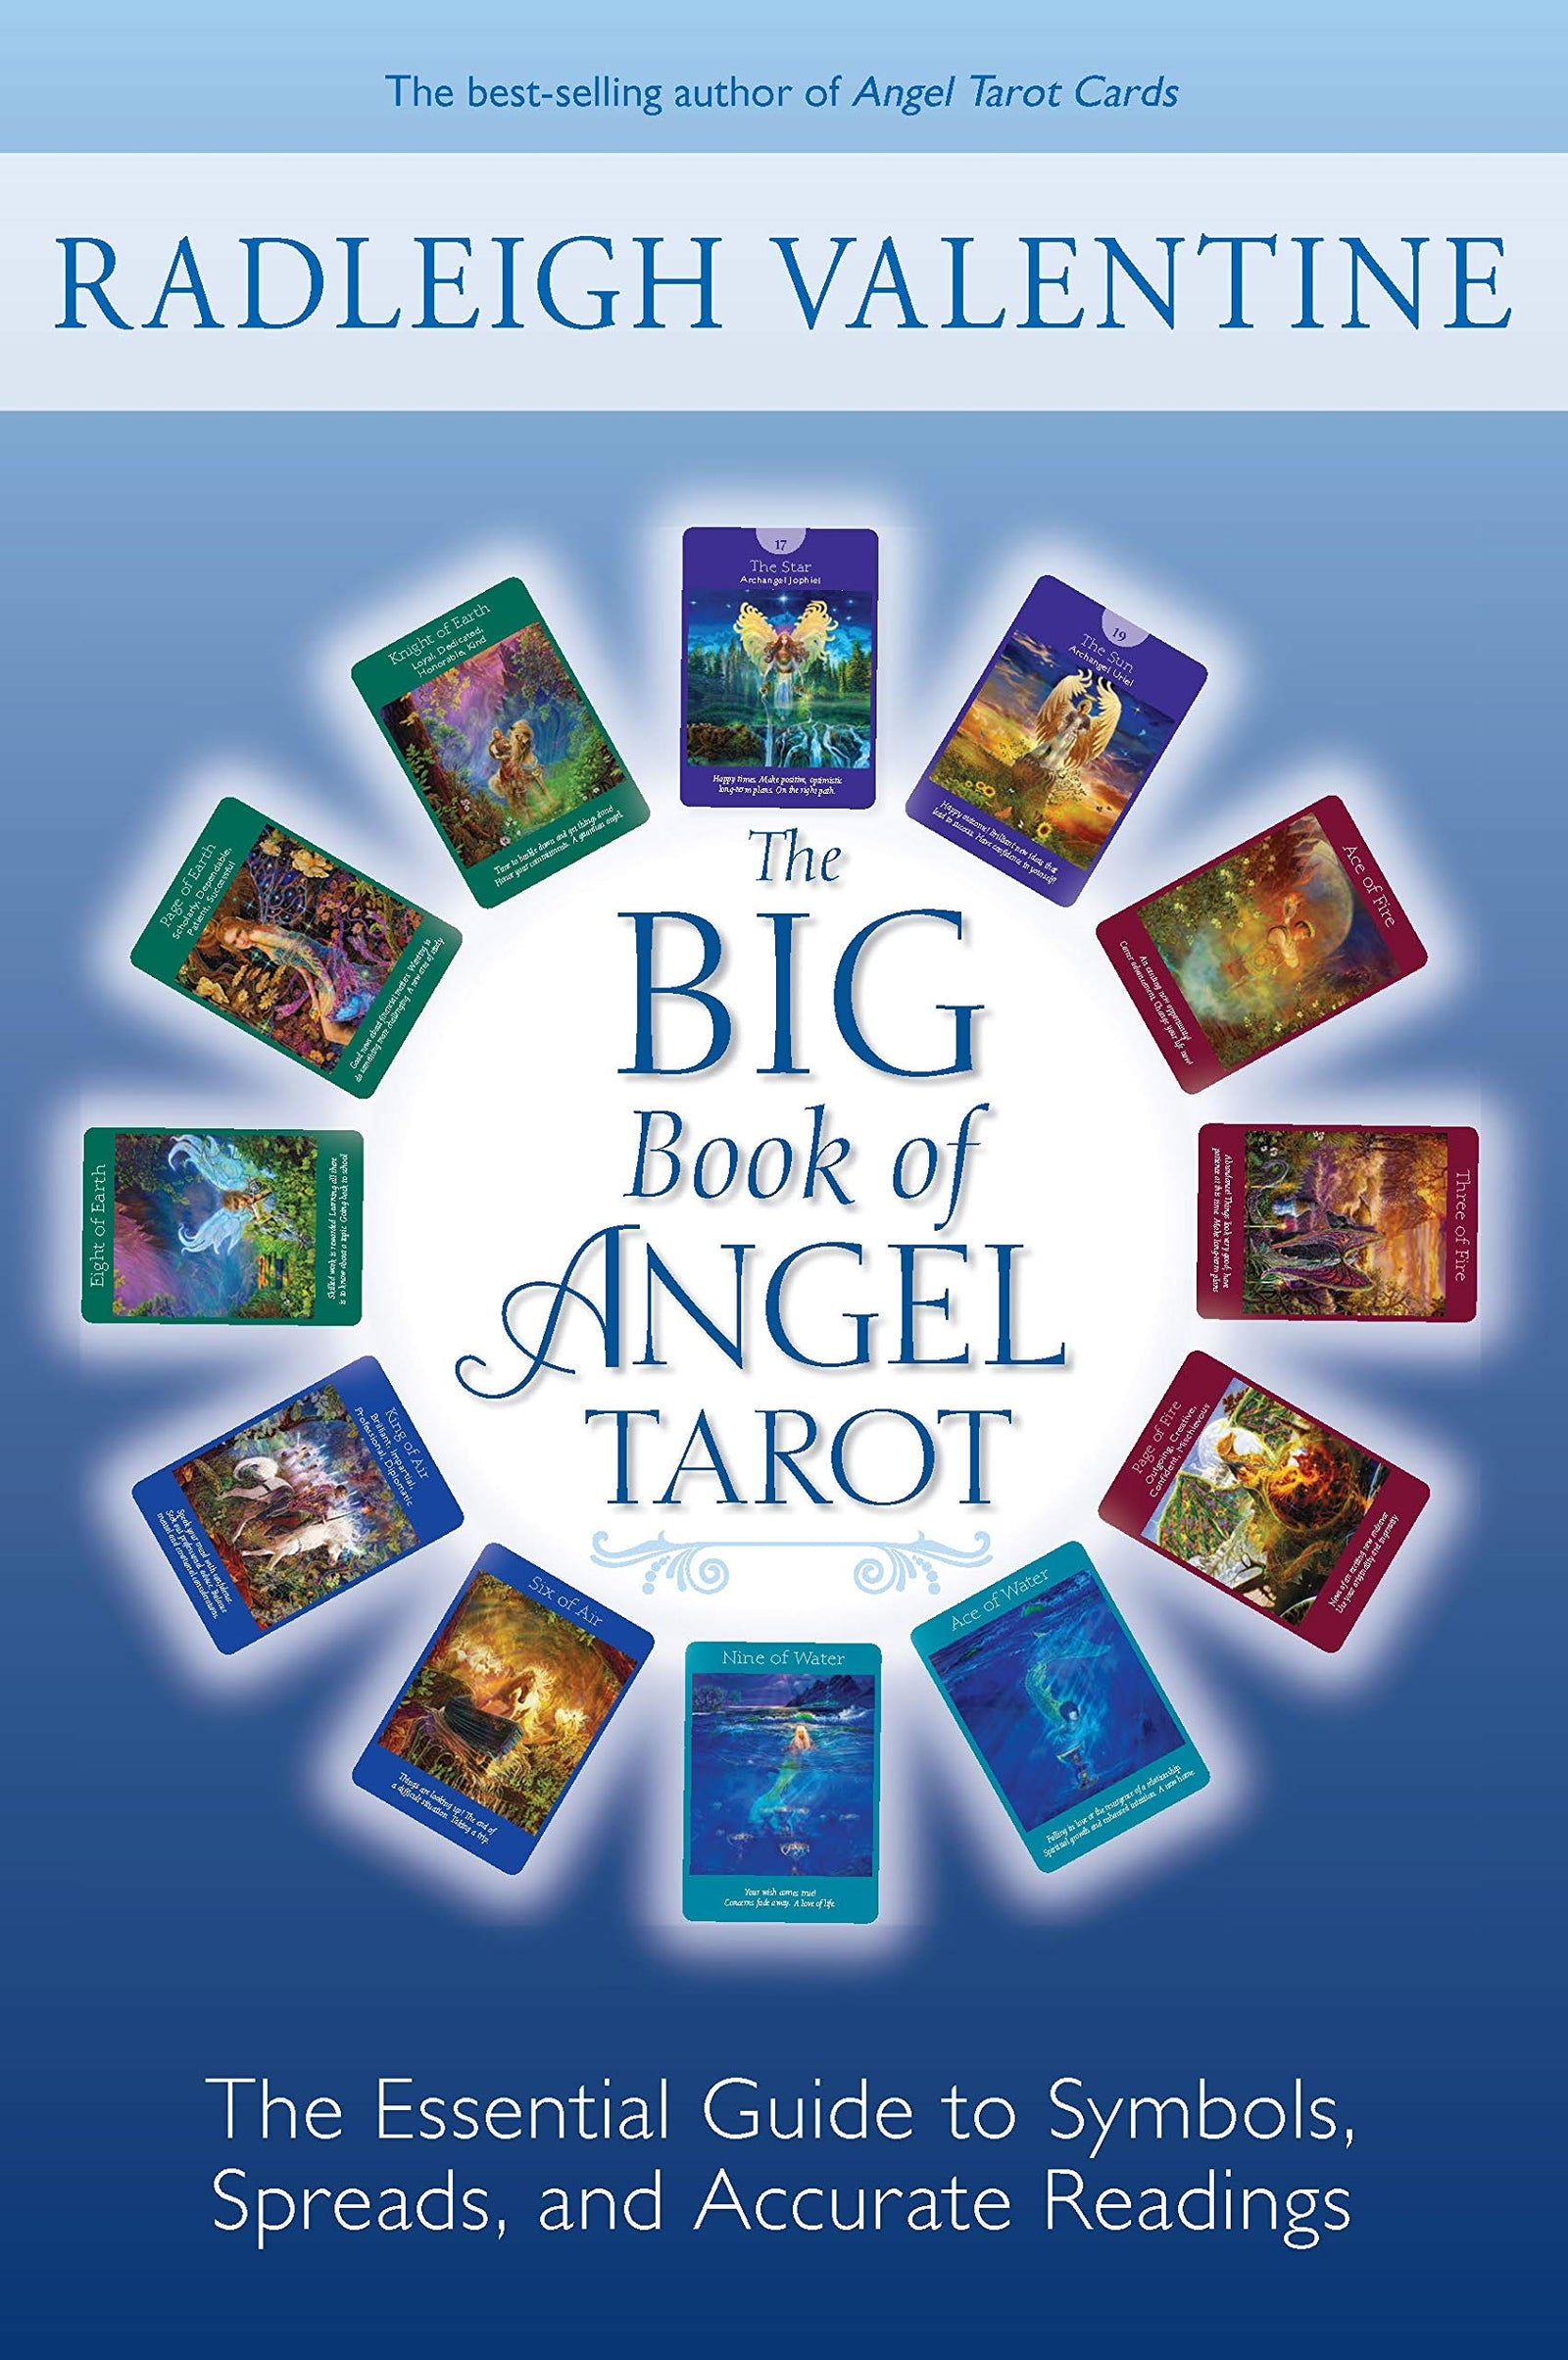 The Big Book of Angel Tarot: The Essential Guide to Symbols, Spreads, and Accurate Readings